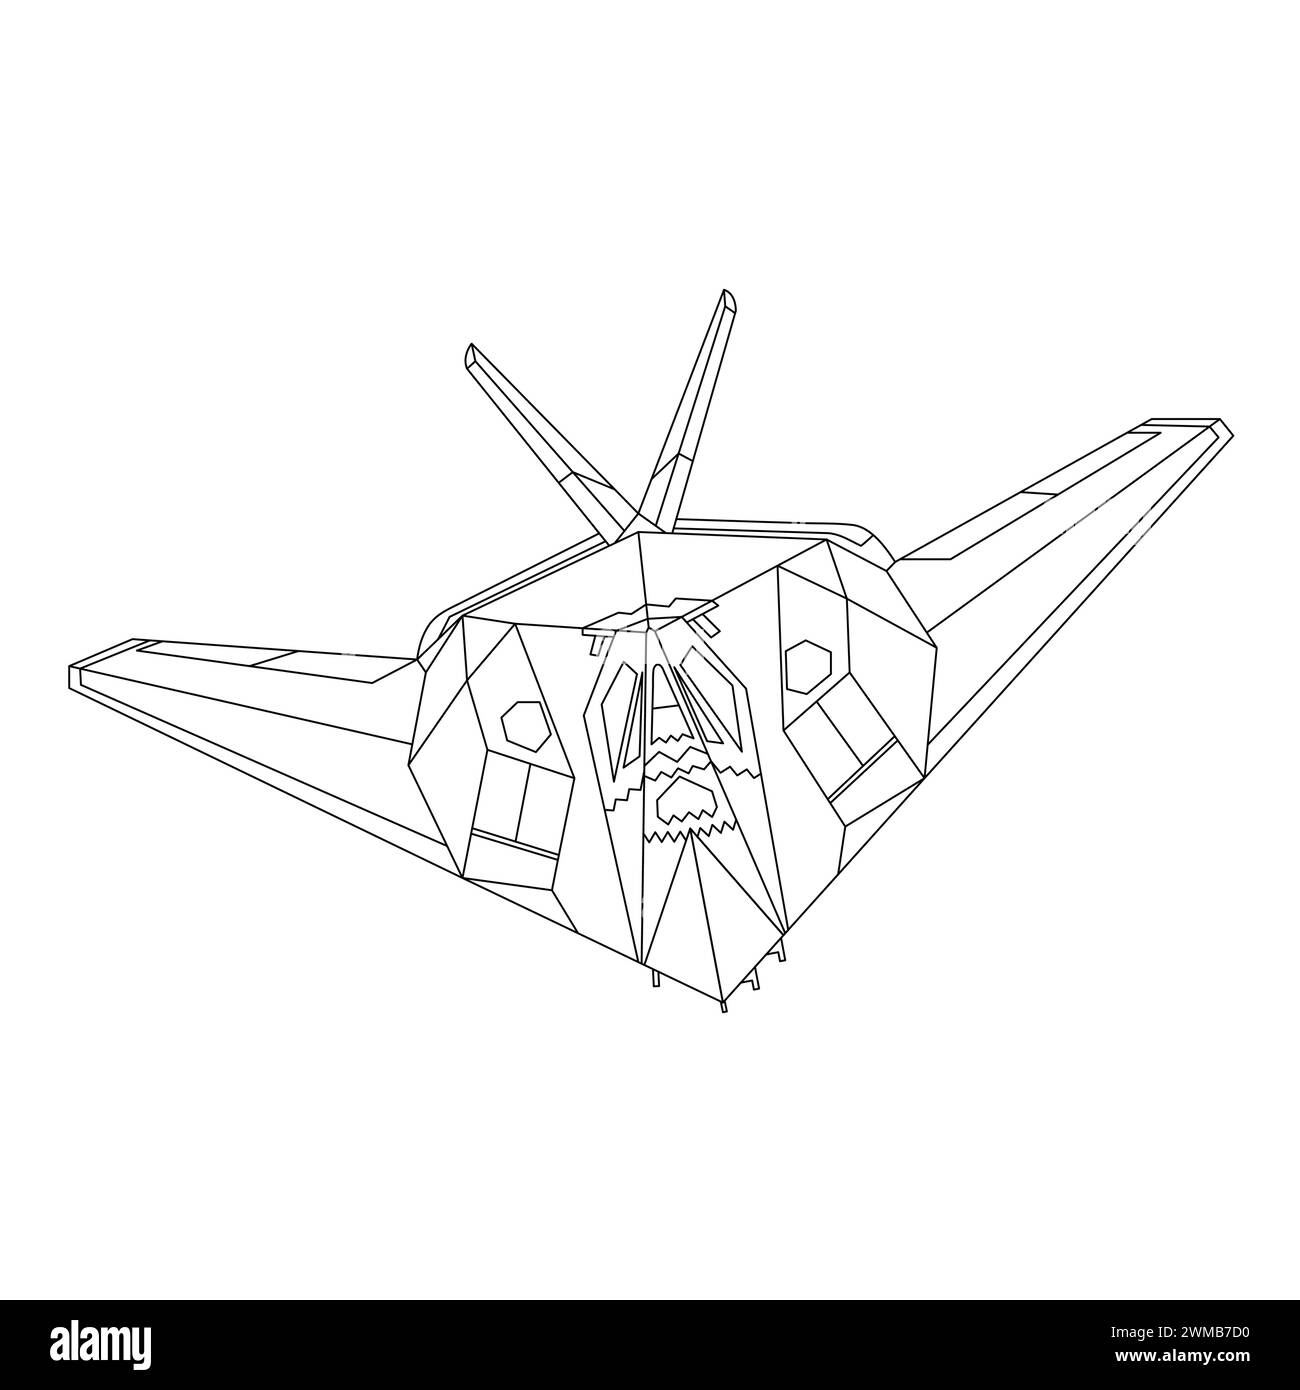 Aircraft F-117 Nighthawk Outline Illustration. Fighter Jet F117 Coloring Book For Children And Adults. Military Aircraft Vector. Cartoon Airplane Stock Vector